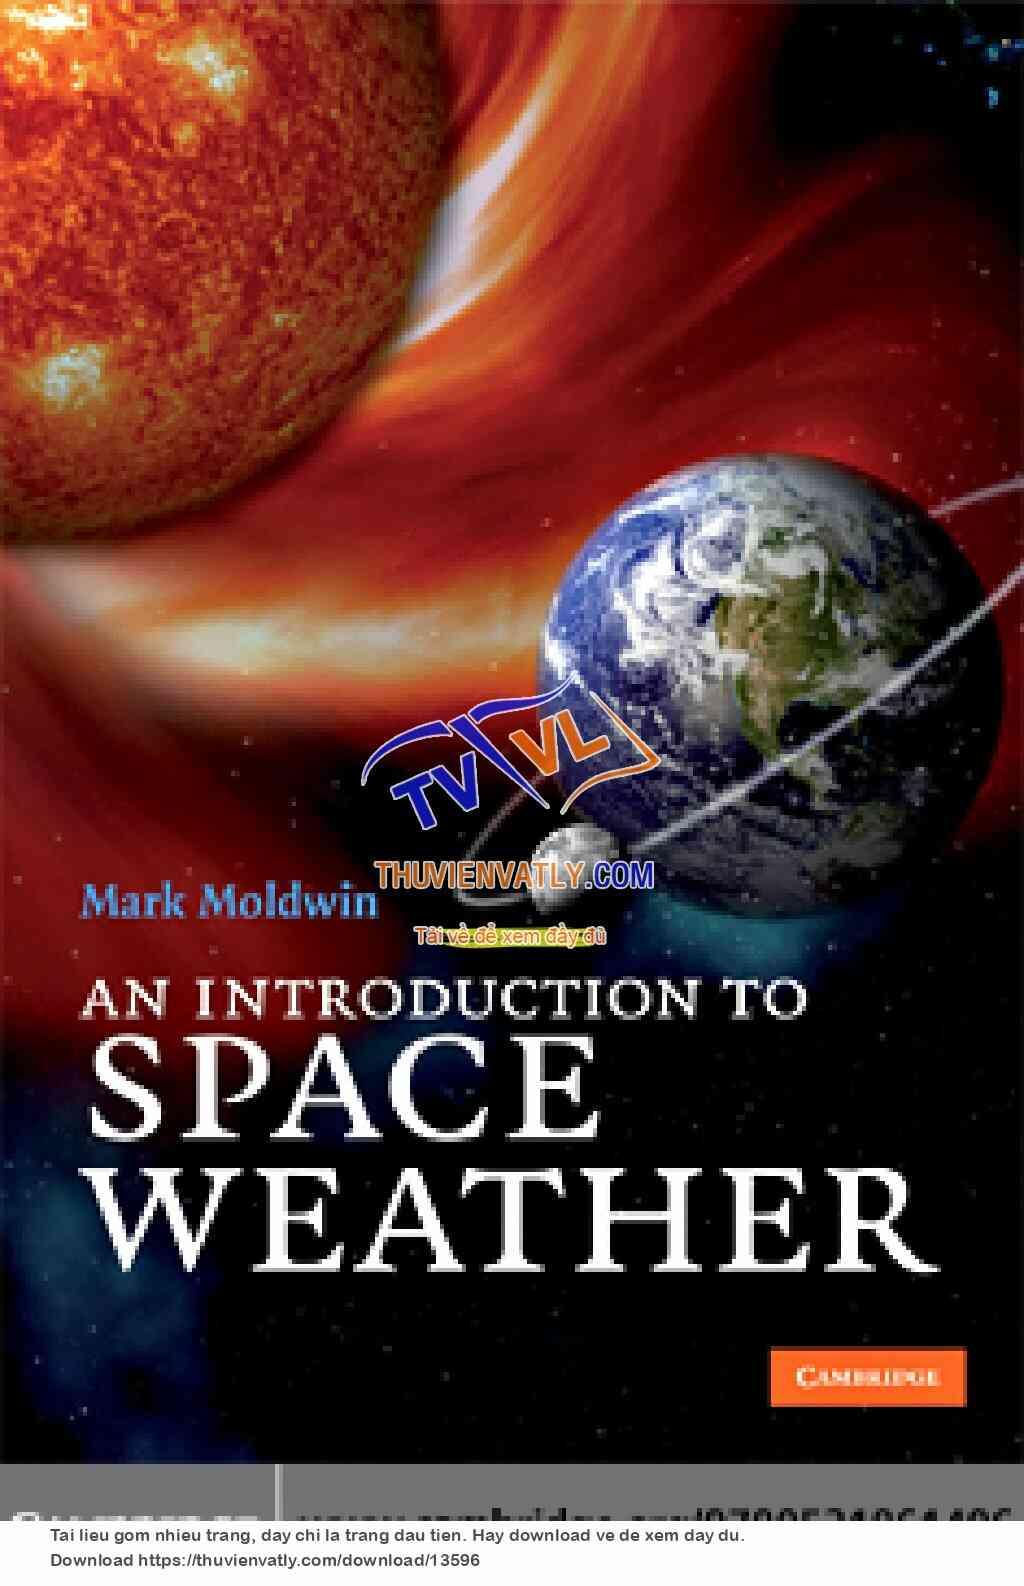 An Introduction to Space Weather - M. Moldwin (Cambridge, 2008)